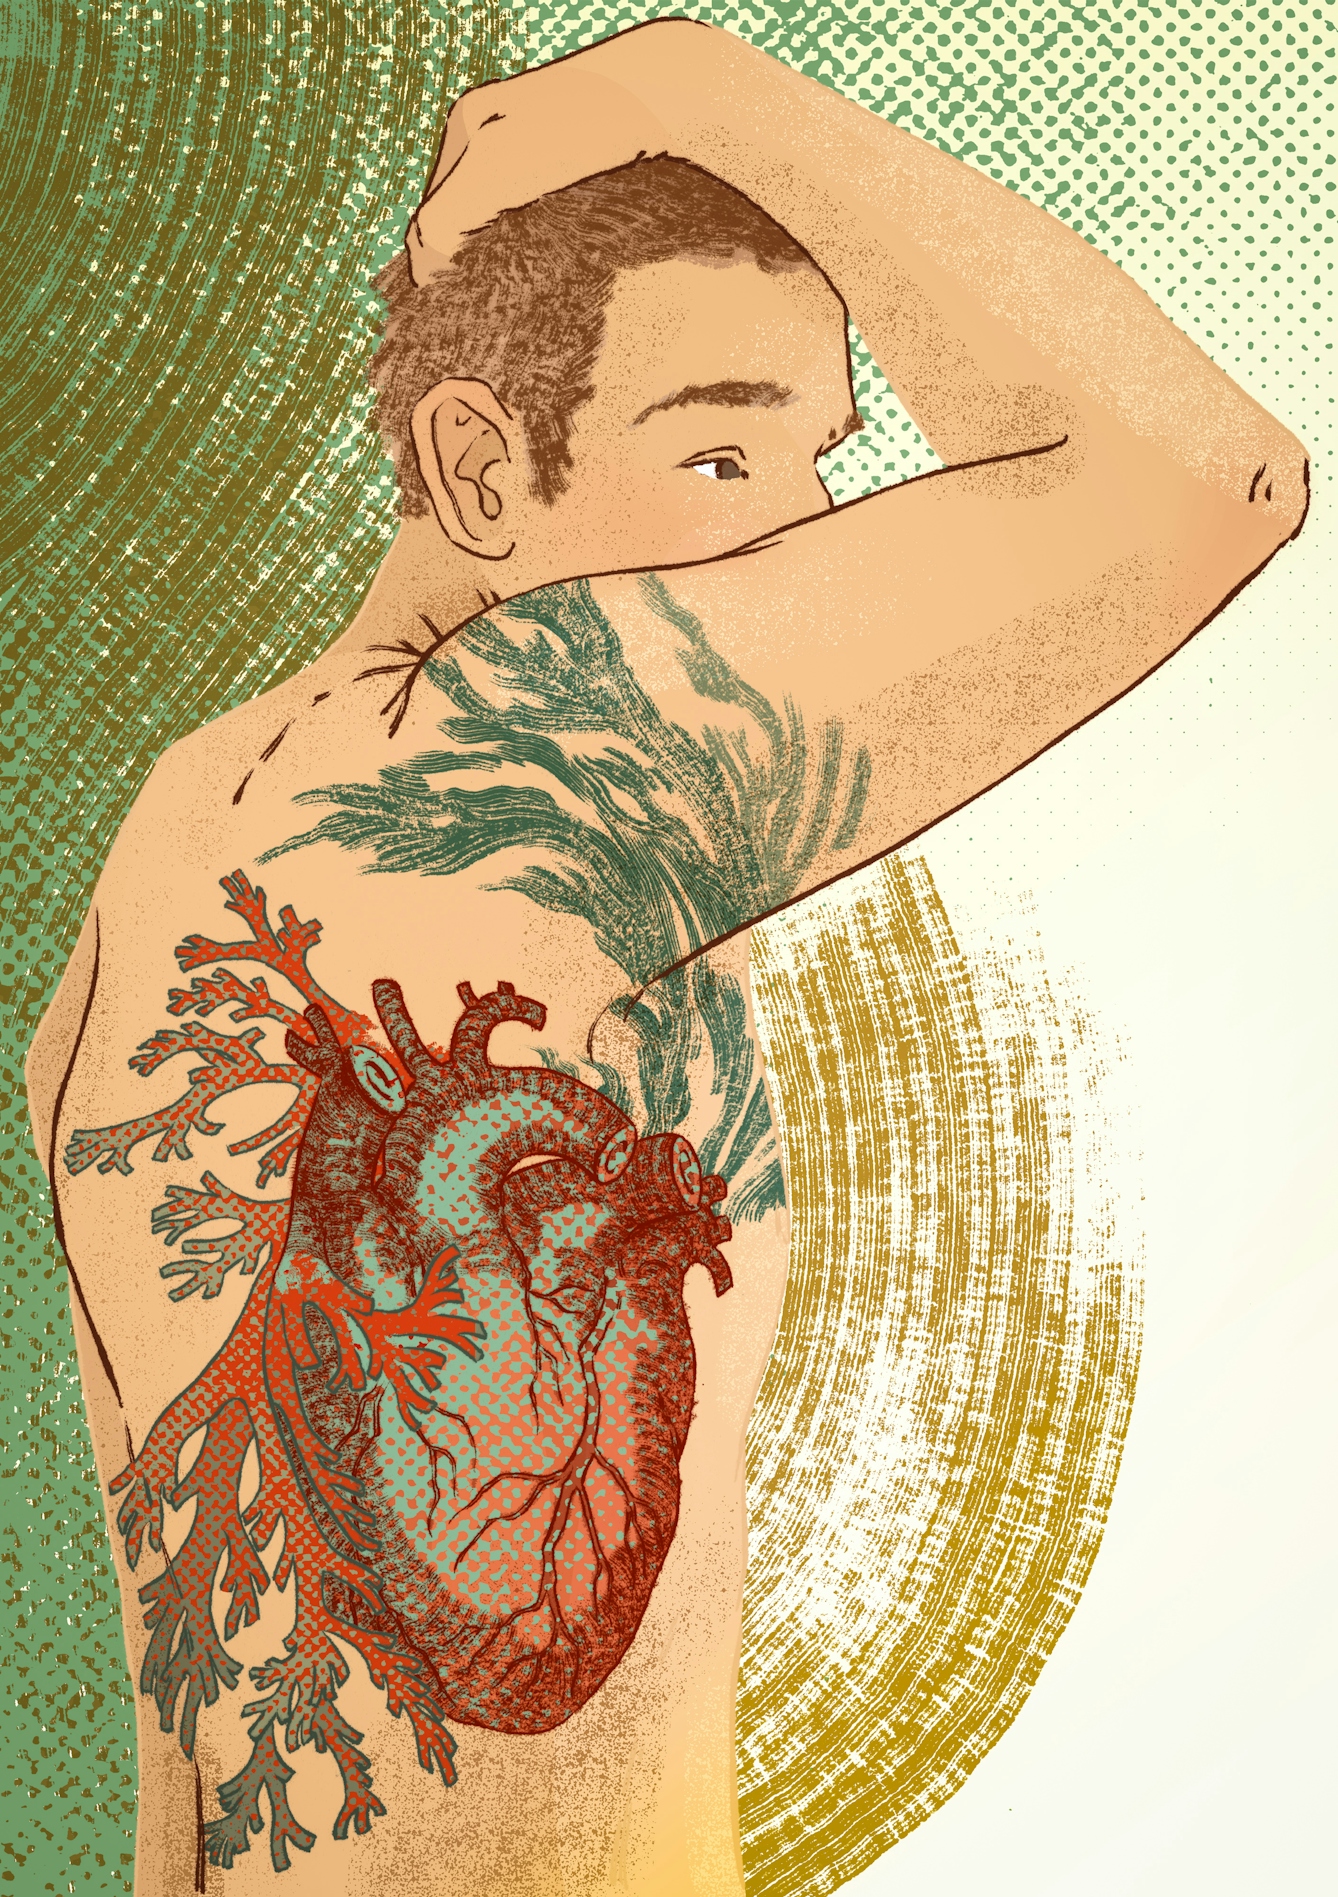 Digital colour artwork showing the bare torso of a man. He is viewed from the right hand side and is holding his right arm up over his head, obscuring part of his face. On his side, back and arm is a colourful tattoo-like illustration of an anatomical drawing of a human heart set with flame-like decorative motifs. The tattoo is made up of red and bluey green tones. Behind the figure are abstract circular and half-tone printed background patterns in yellows and greens.